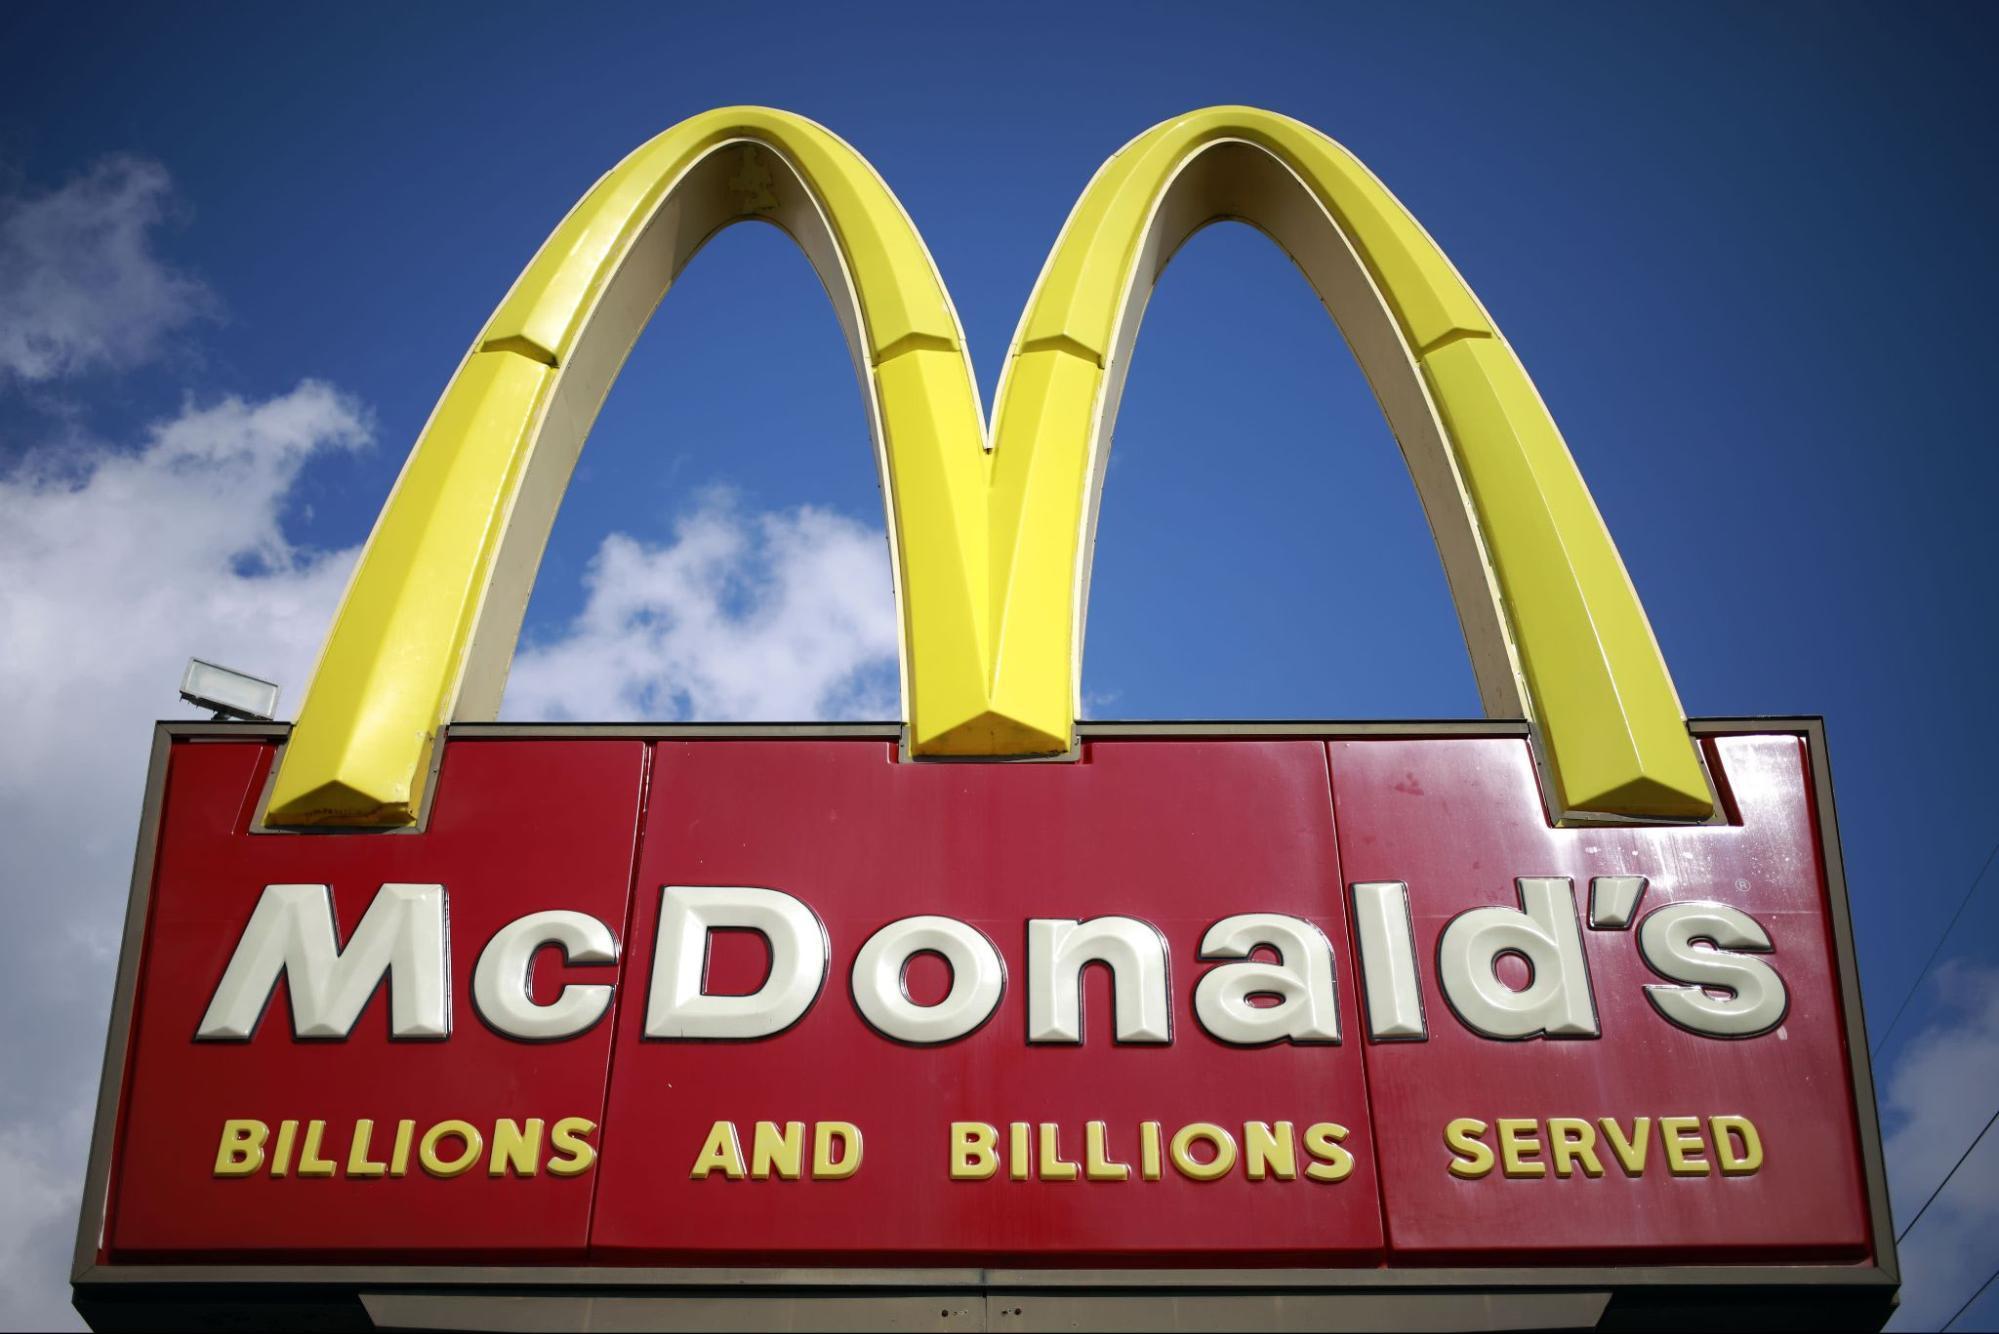 Red and yellow McDonald's sign - Billions and billions served